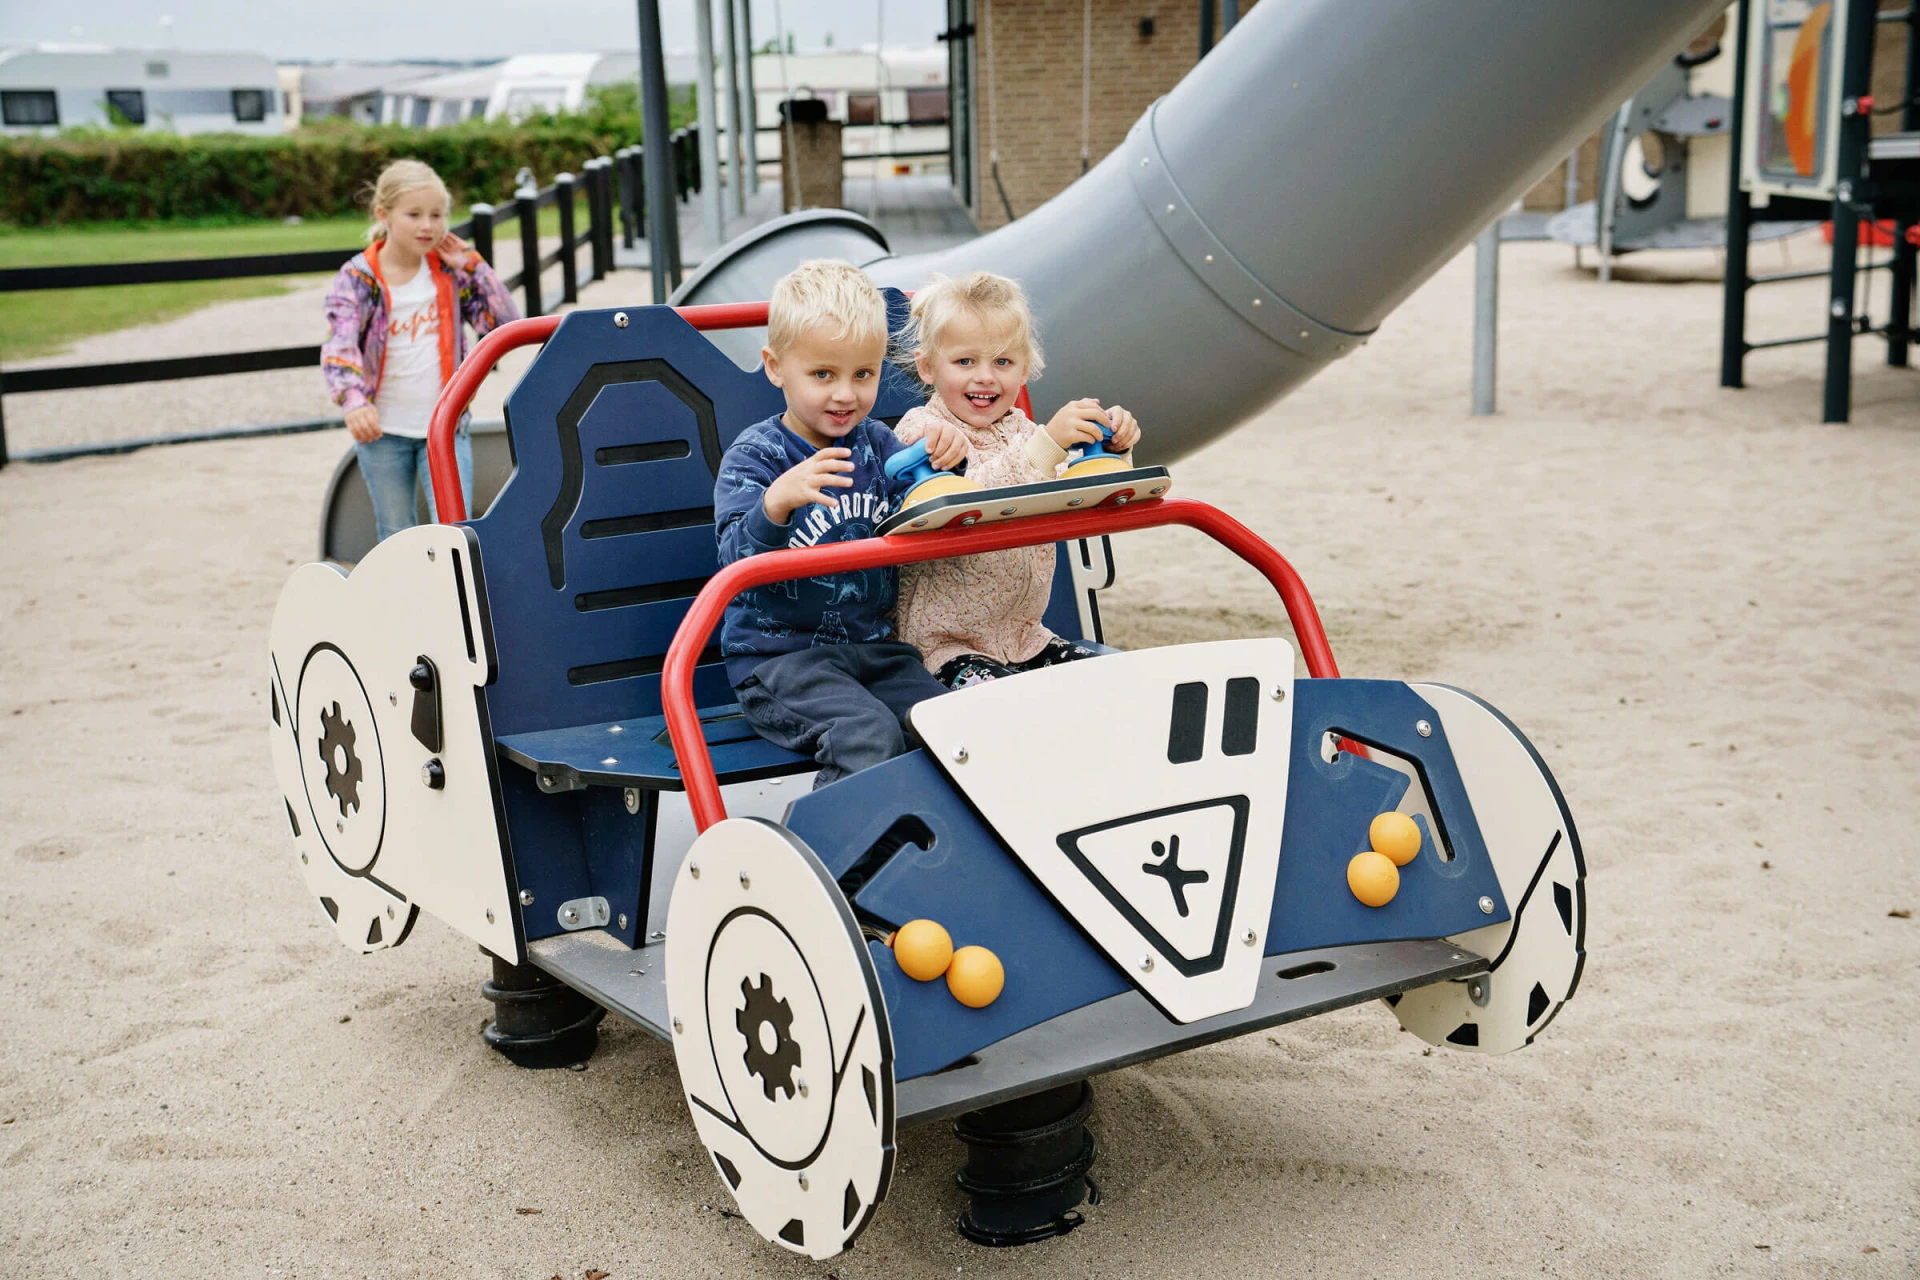 children playing in a car themed playground equipment